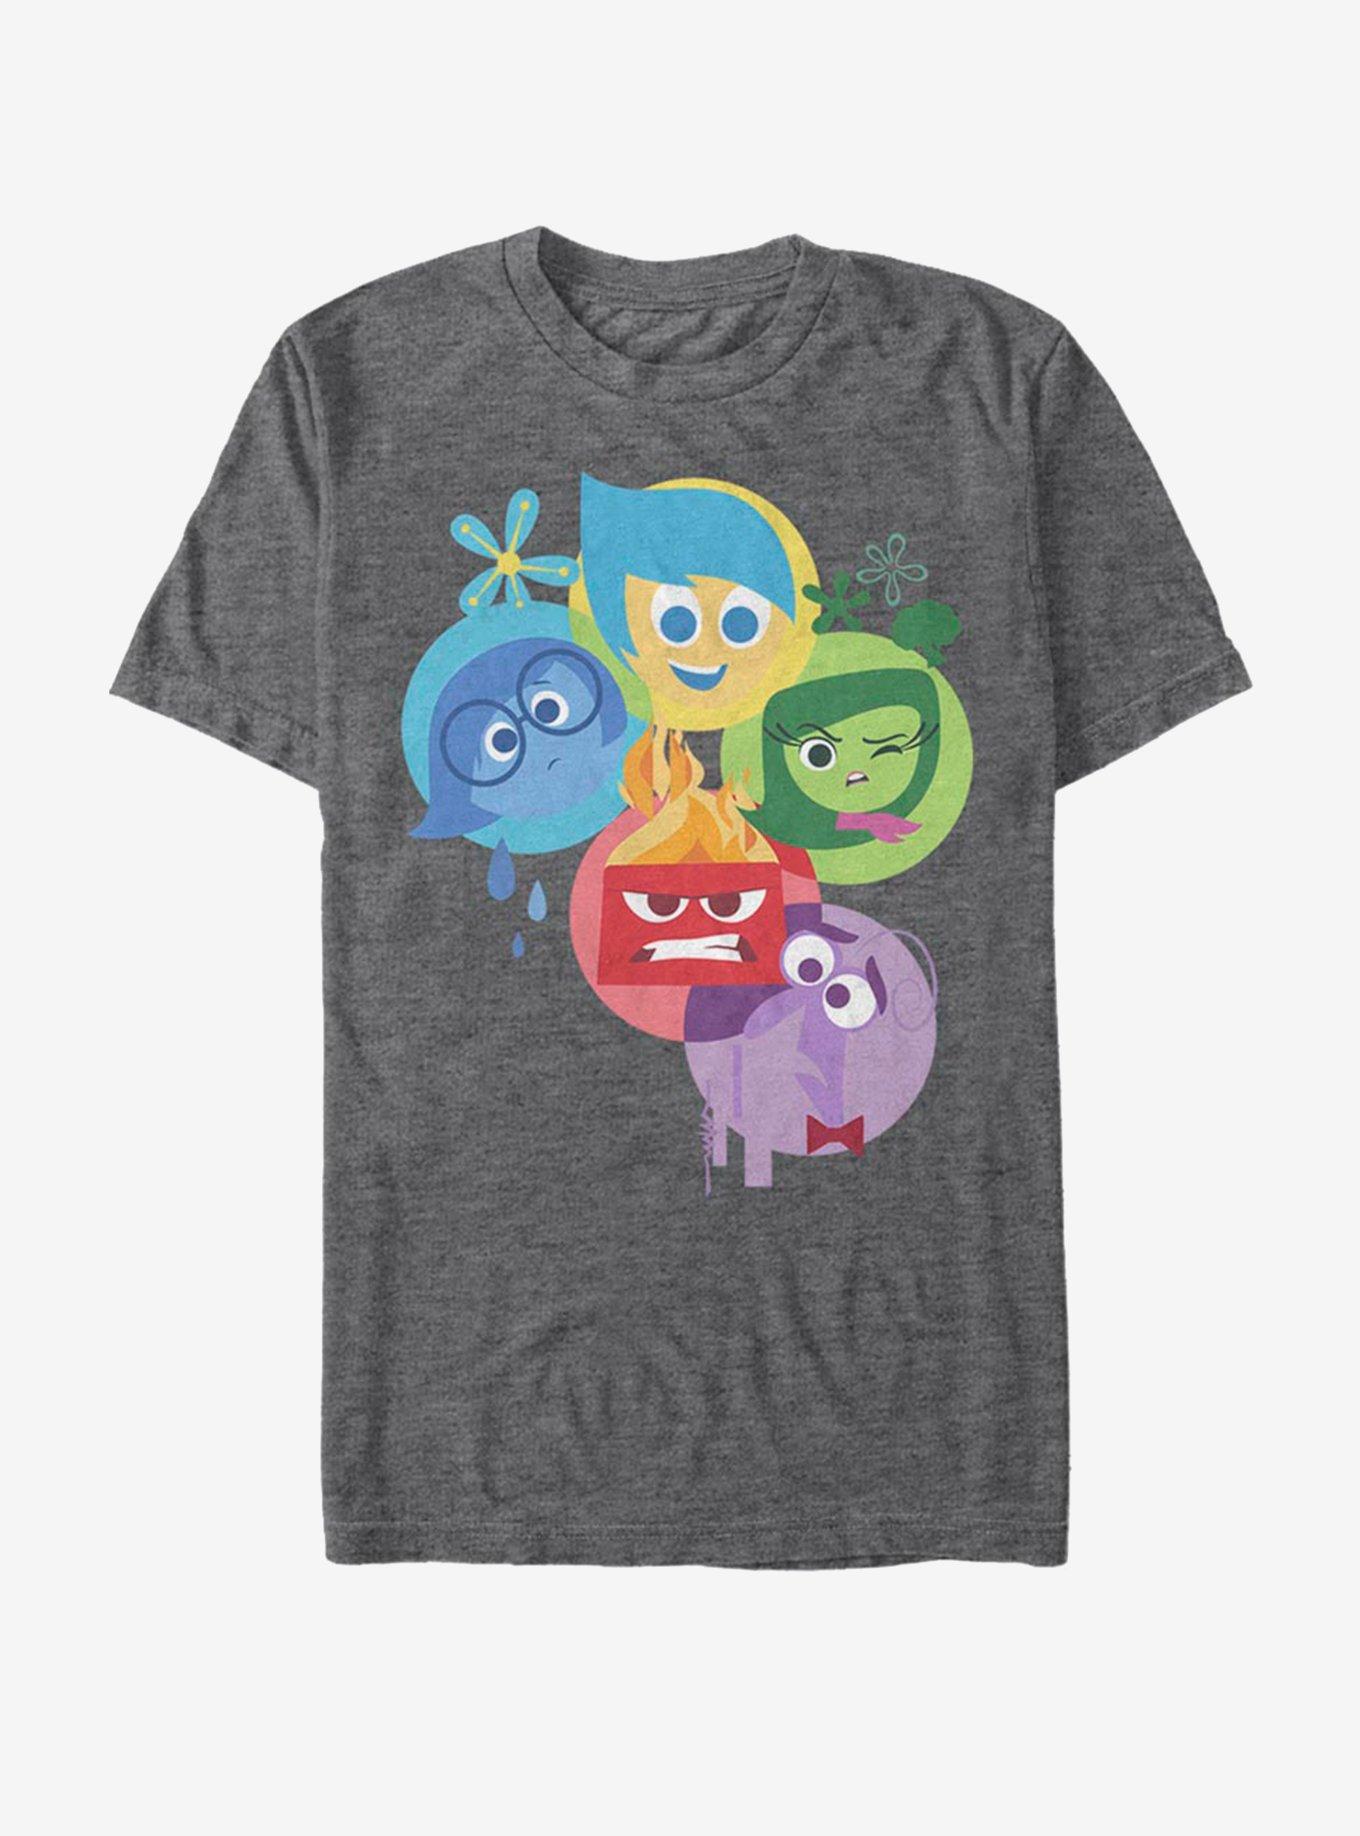 Disney Inside Out. iron on T shirt transfer. Choose image and size